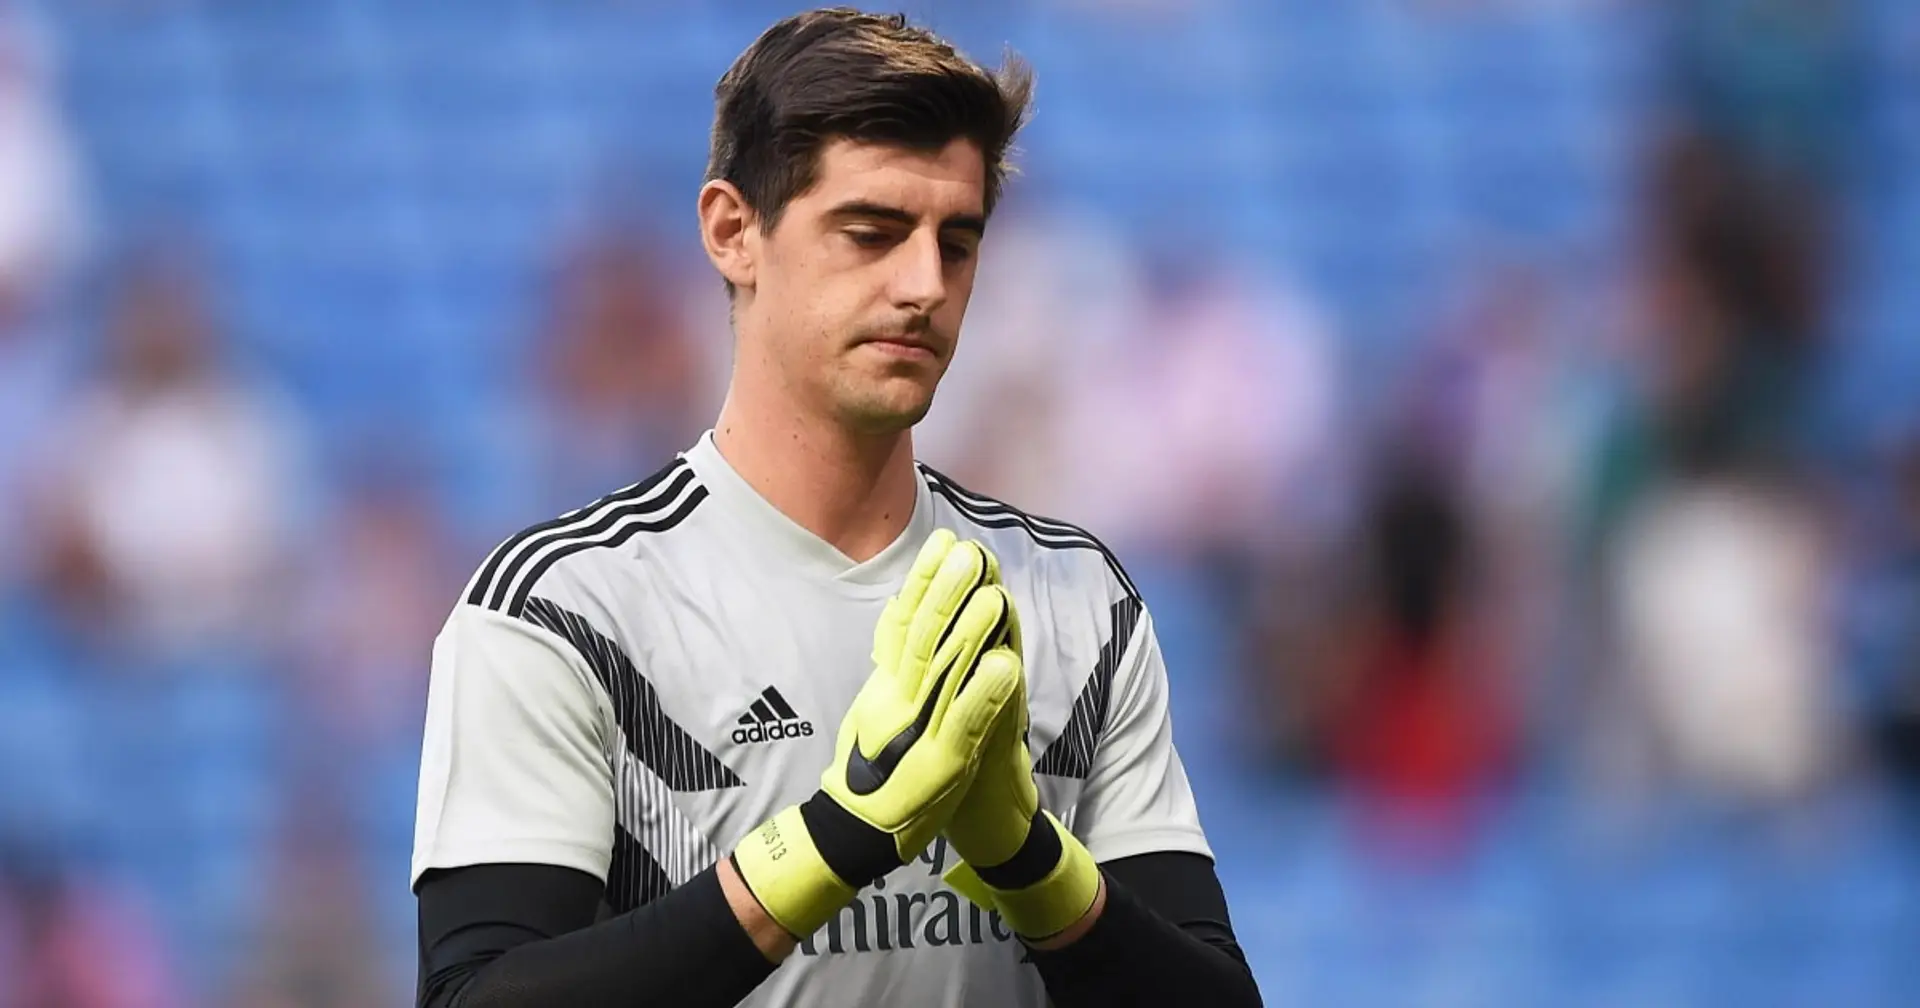 'For every single Belgian he's the world's greatest': Roberto Martinez hails Courtois excellent performances this season